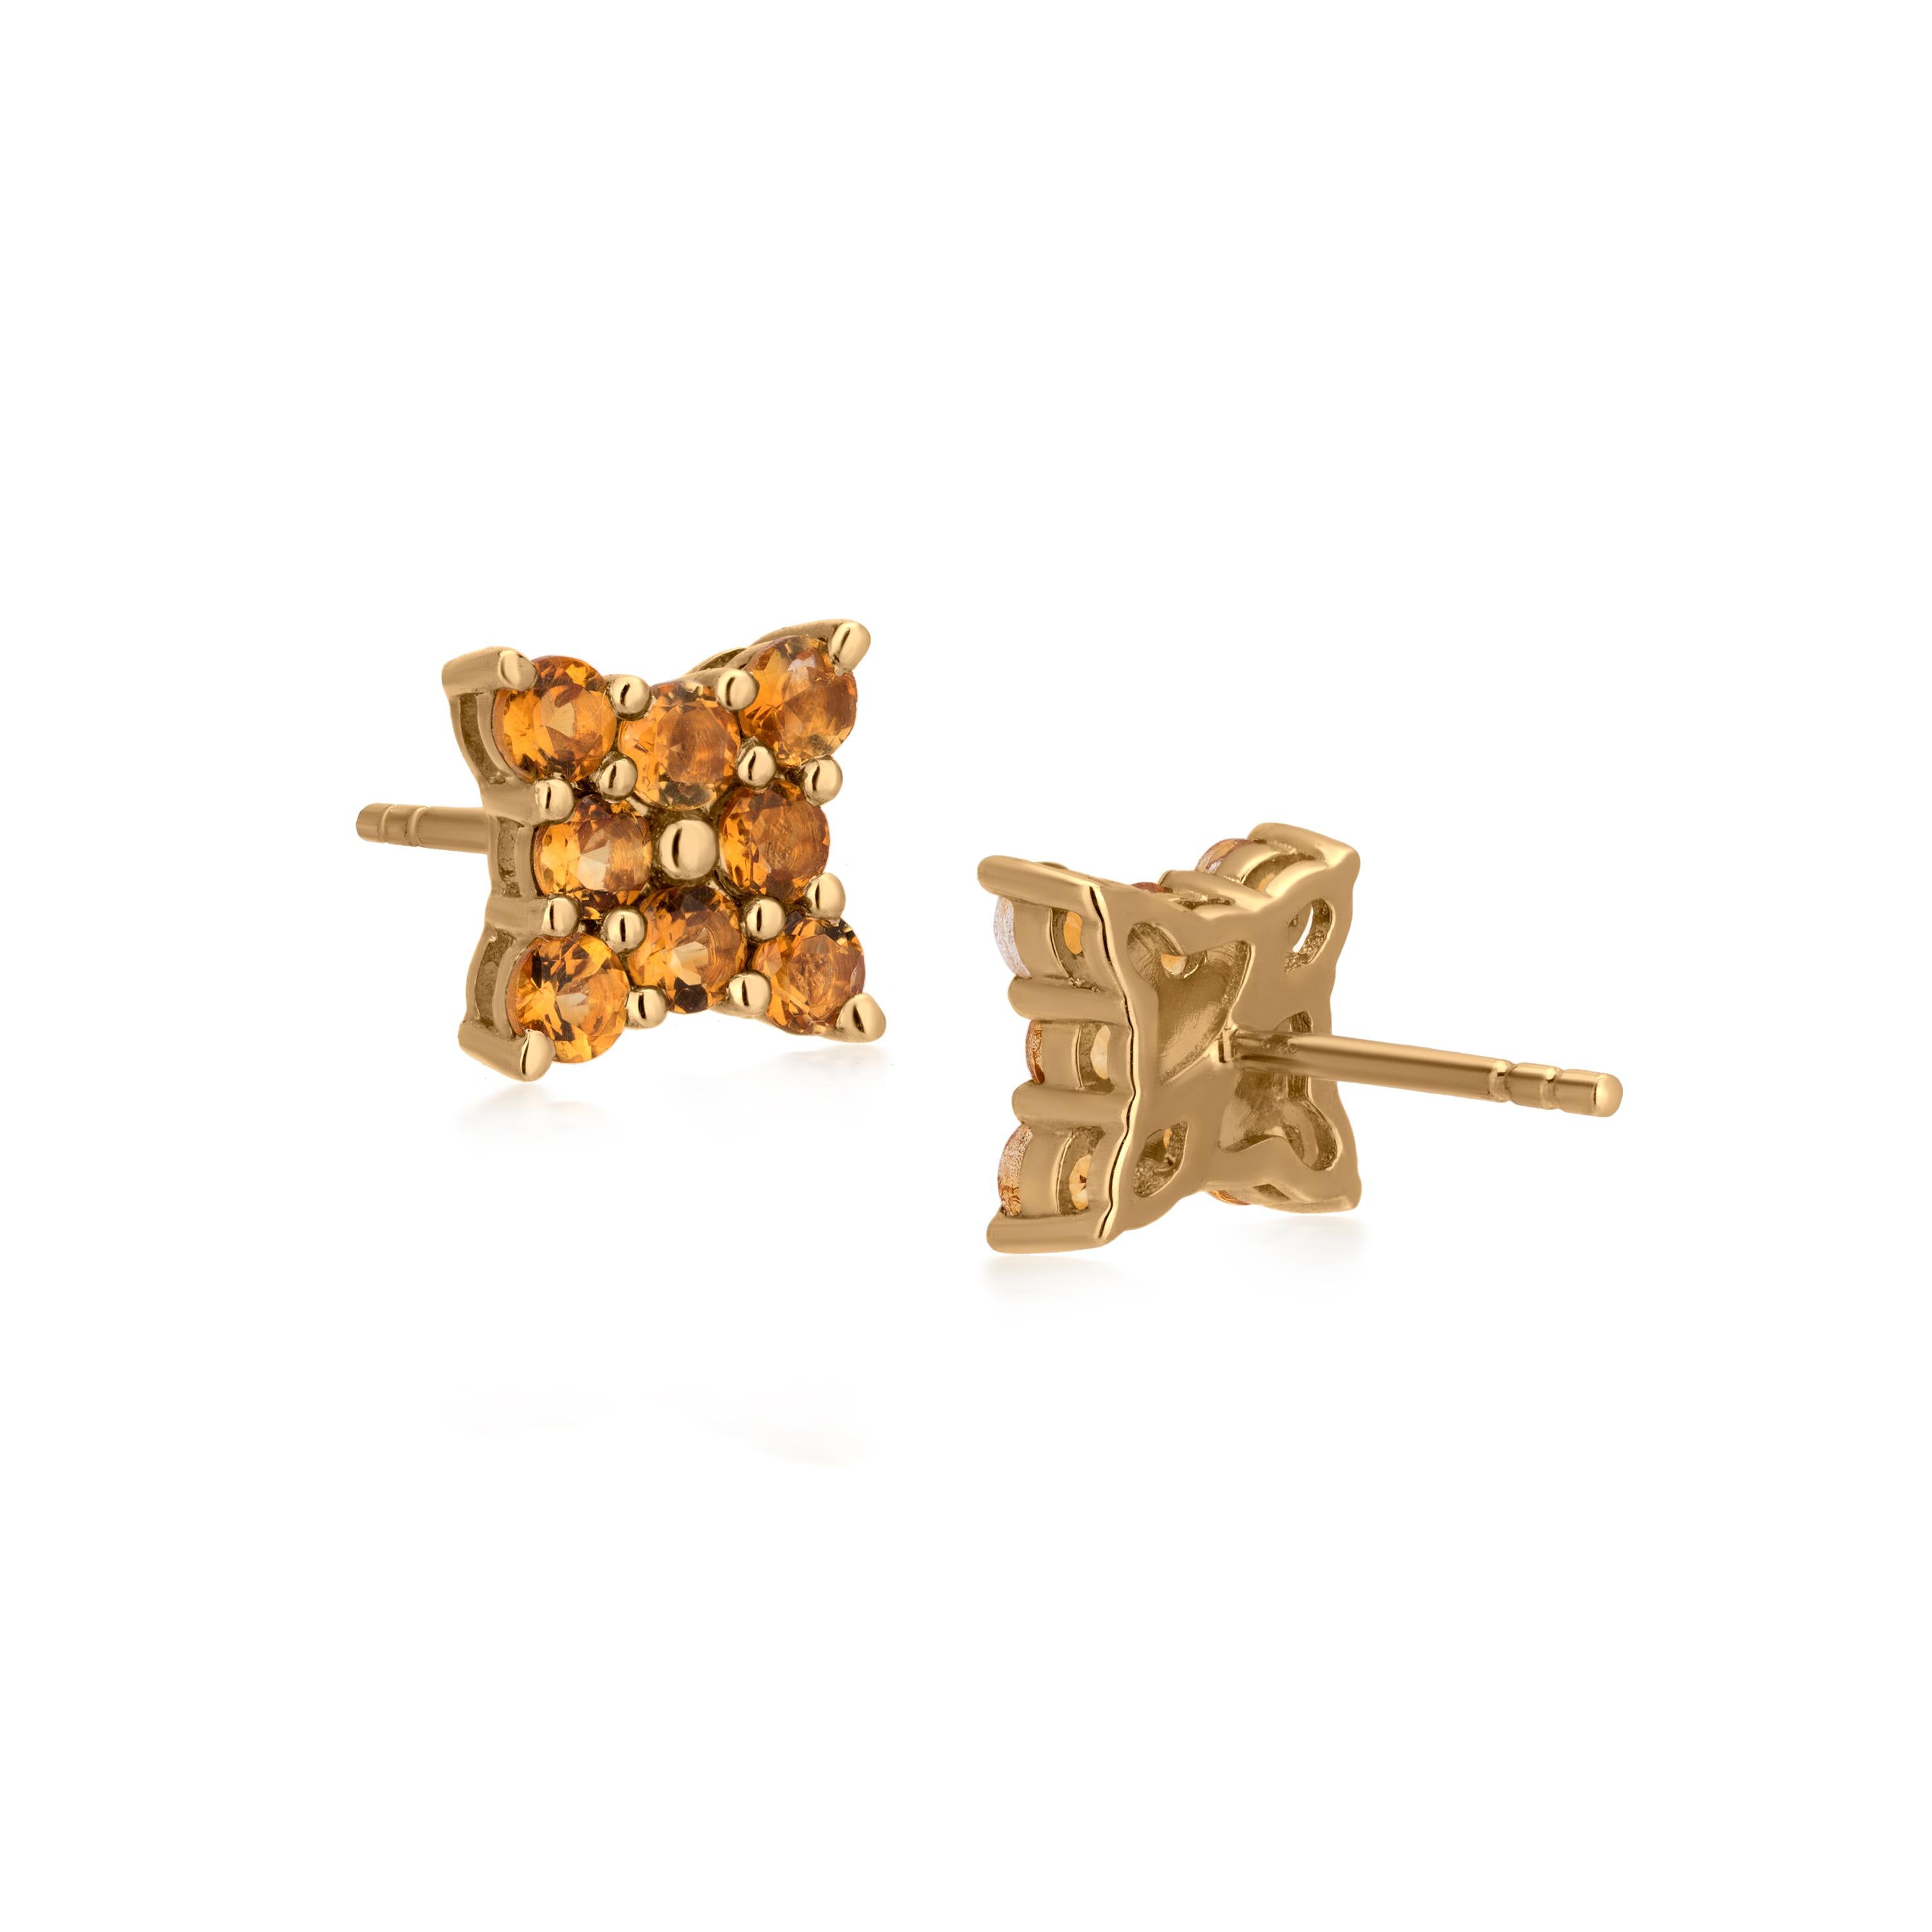 Round Cut Gemistry 0.85cttw Round Citrine Stud Earrings in 14k Yellow Gold For Sale